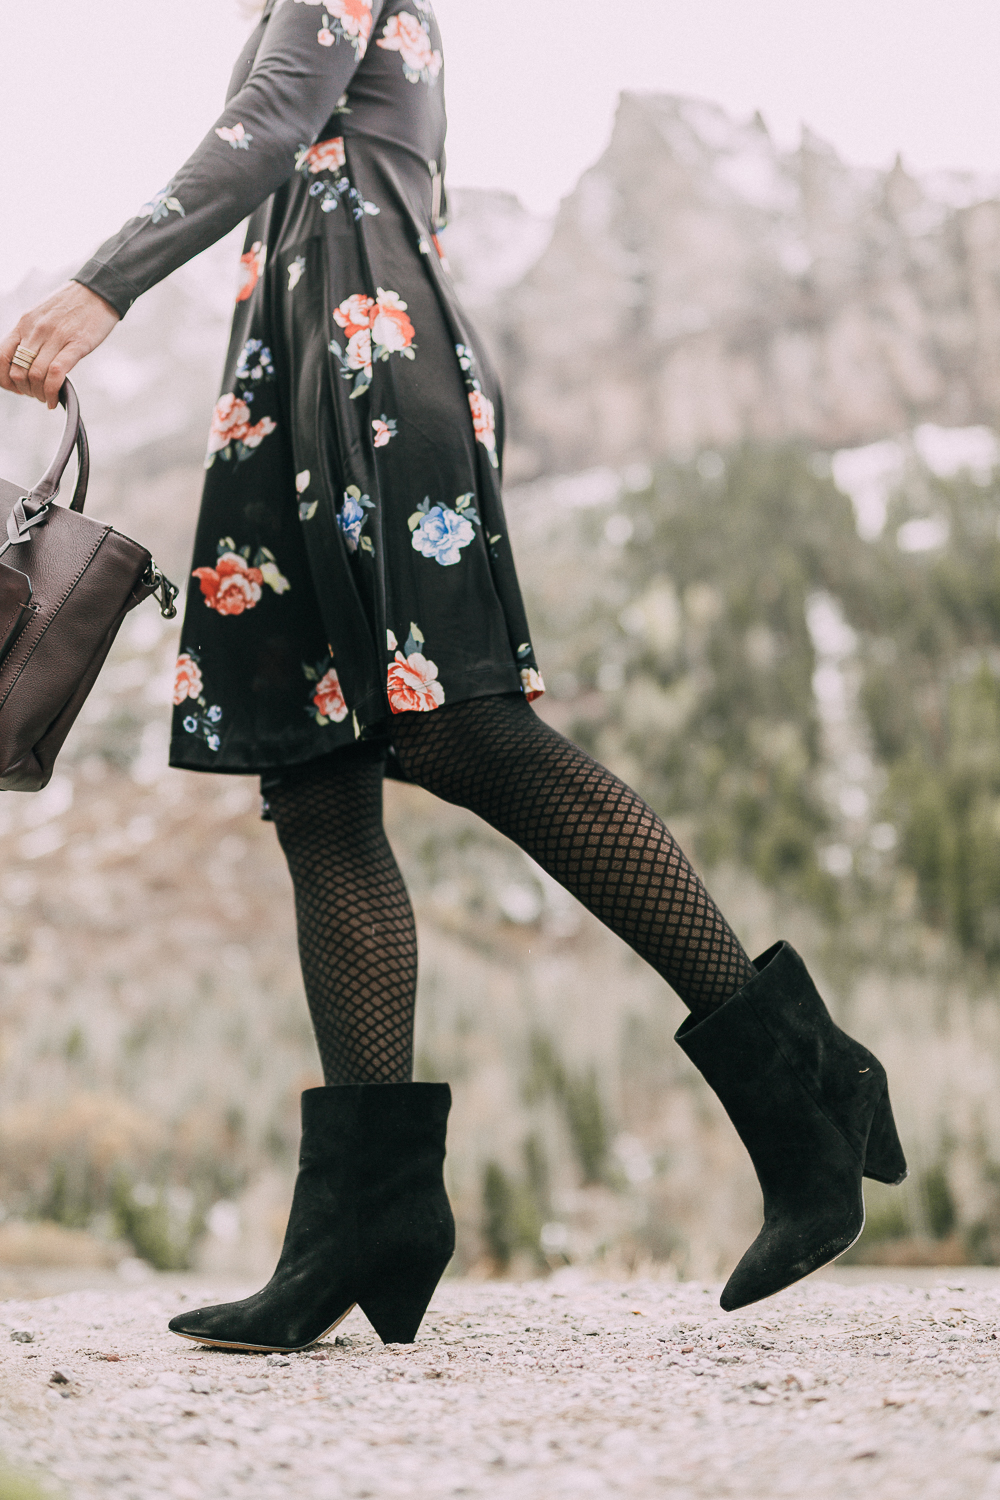 Suede Booties by Vince Camuto paired with black floral print dress and burgundy tote bag on blonde woman in rocky mountains